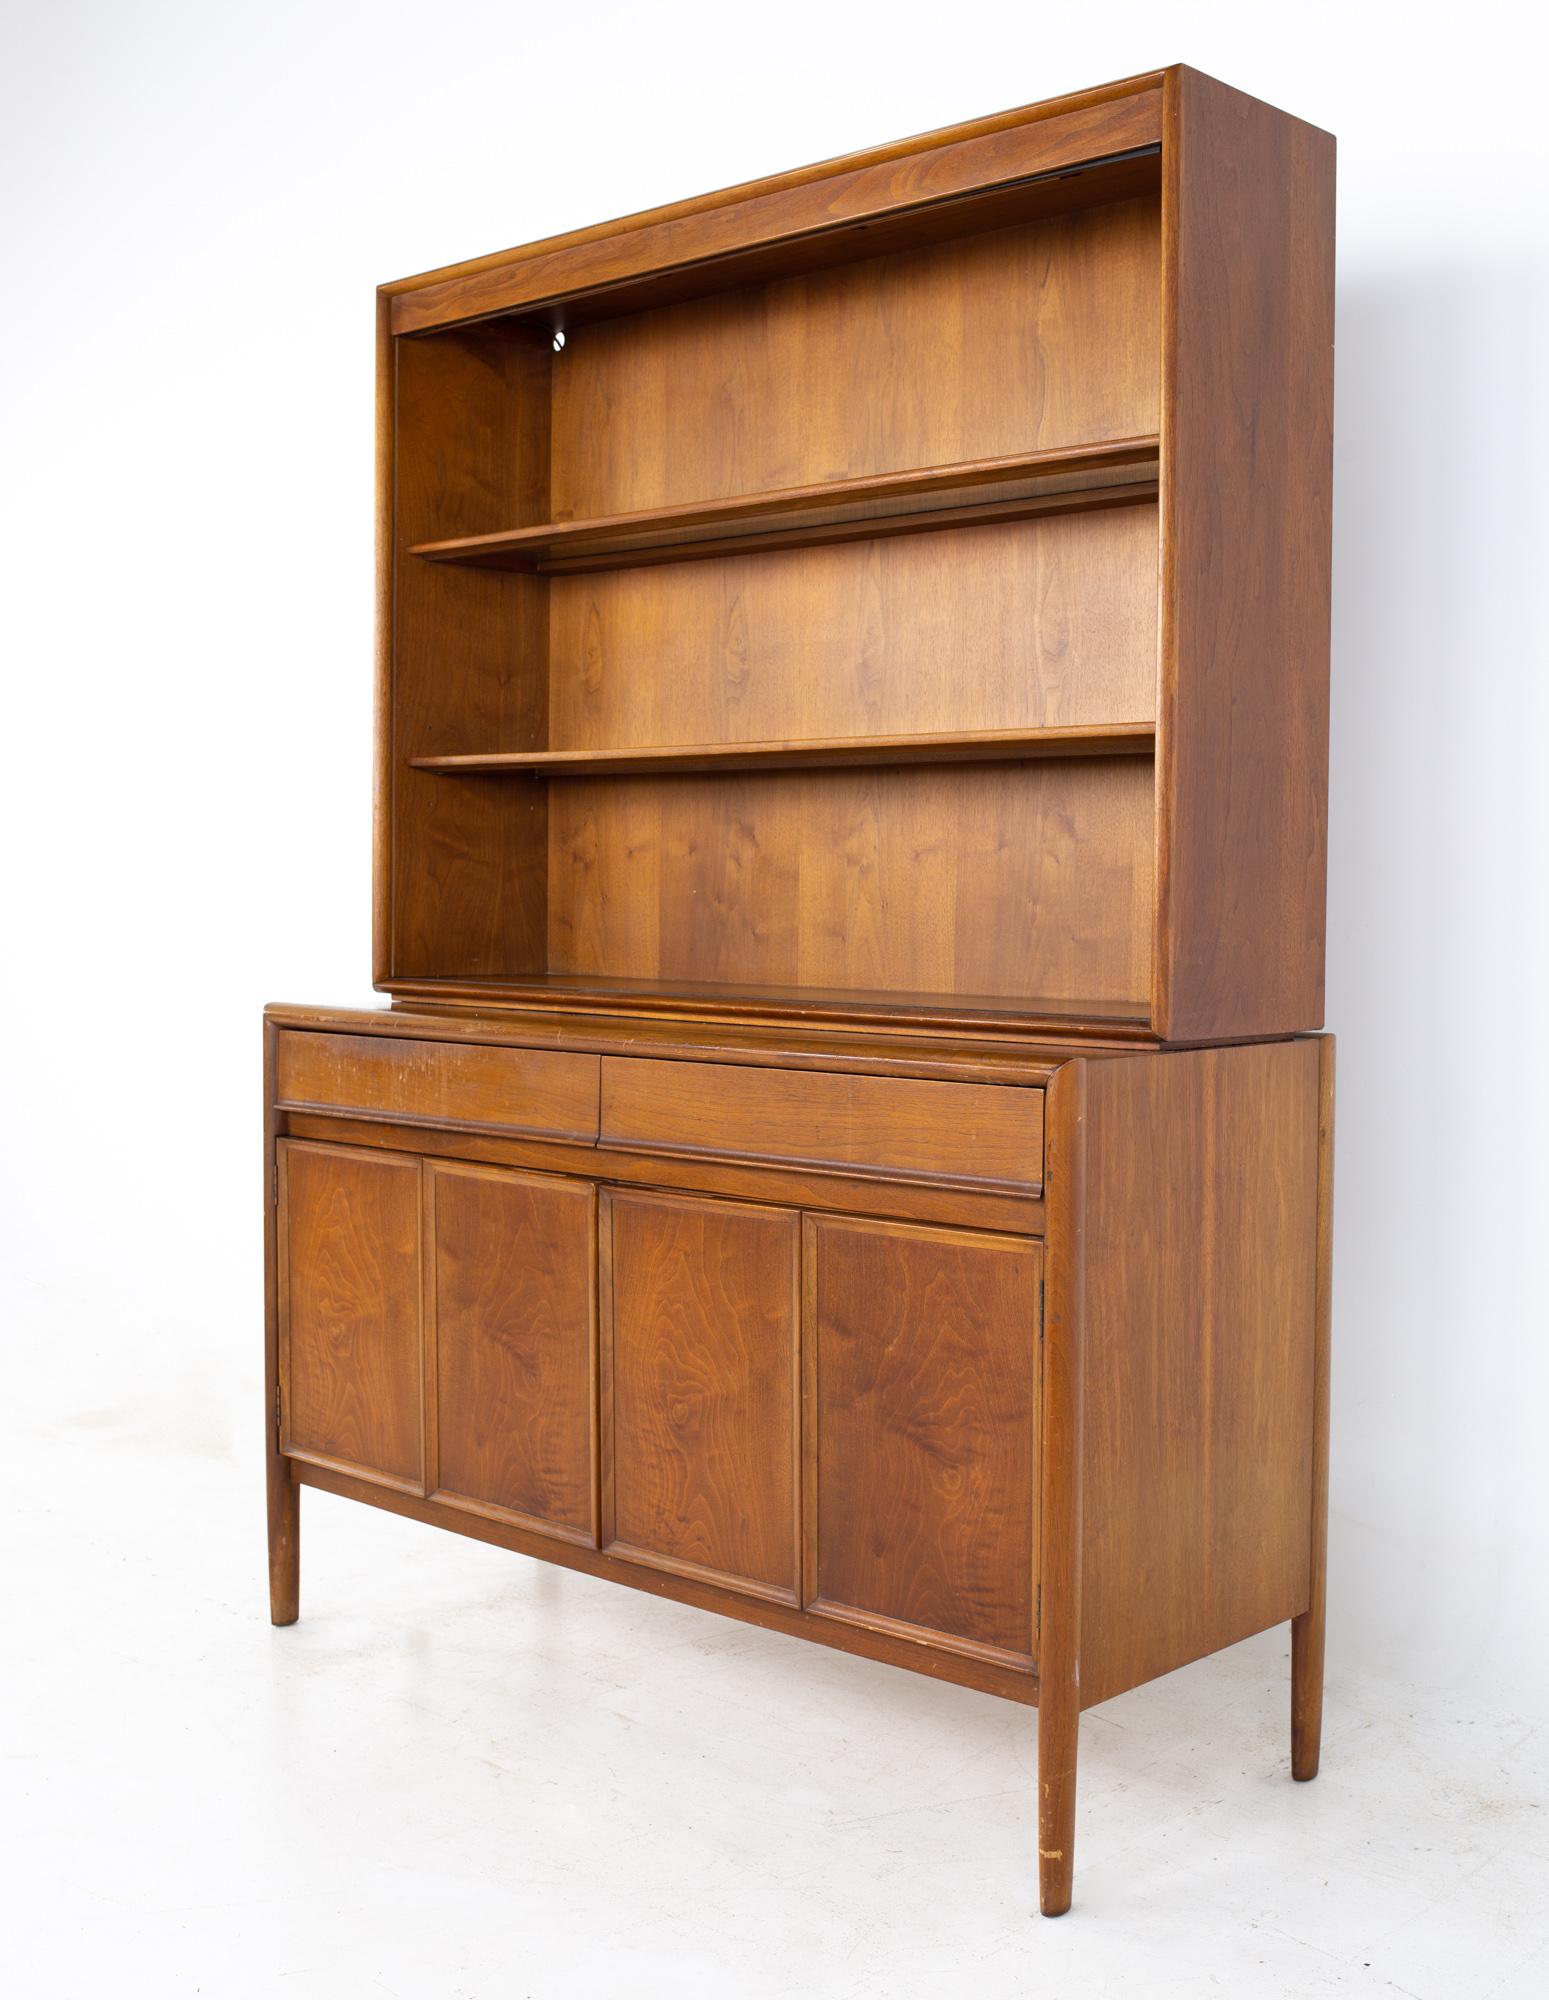 Barney Flagg for Drexel parallel mid century walnut sideboard credenza buffet and hutch
Buffet and hutch measure: 50 wide x 19 deep x 70 inches high; hutch is 12 inches deep 

All pieces of furniture can be had in what we call restored vintage